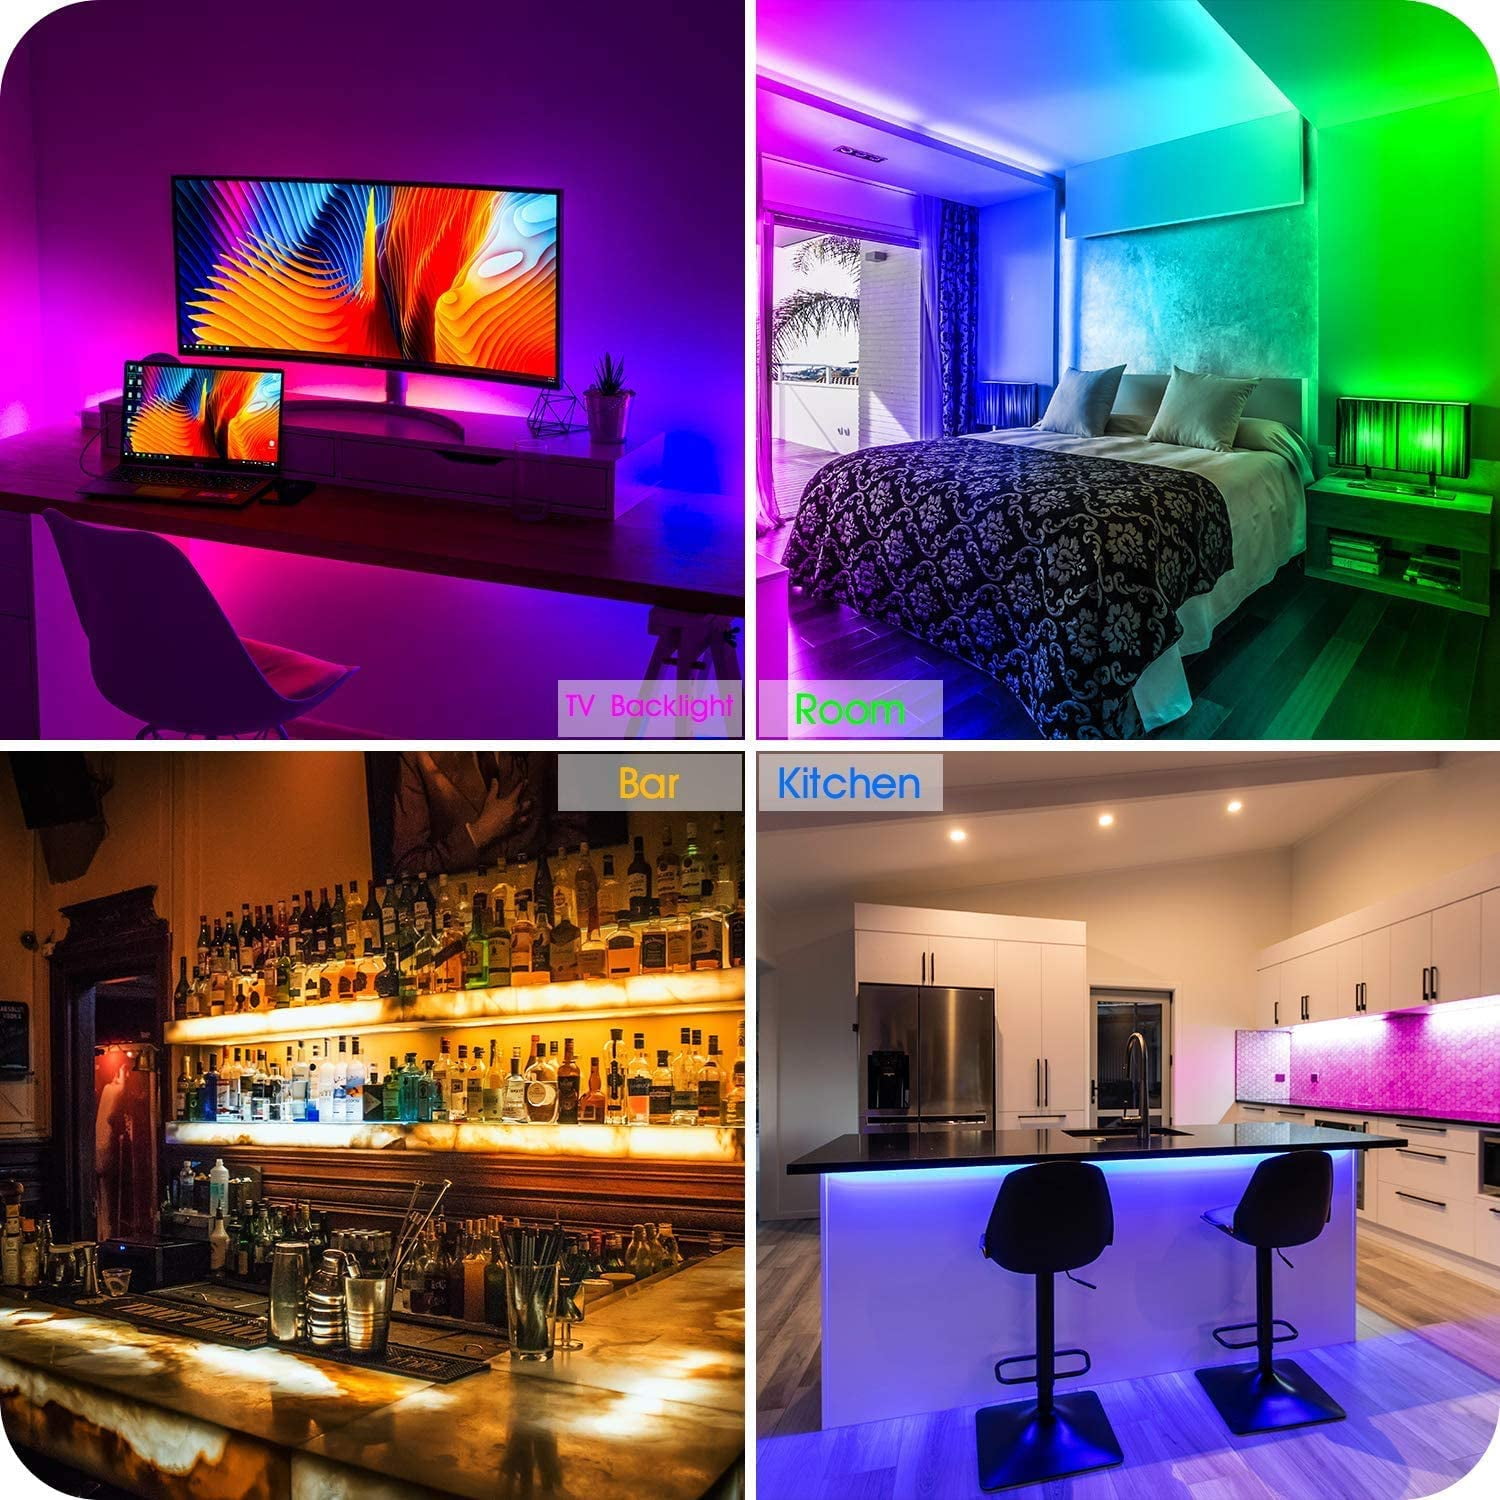 Ehomful 50ft/15m LED Lights strip RGB 5050 with Color Changing and App  Control for Bedroom, Party and Home Decoration (3 rolls 16.4ft/5m each) 